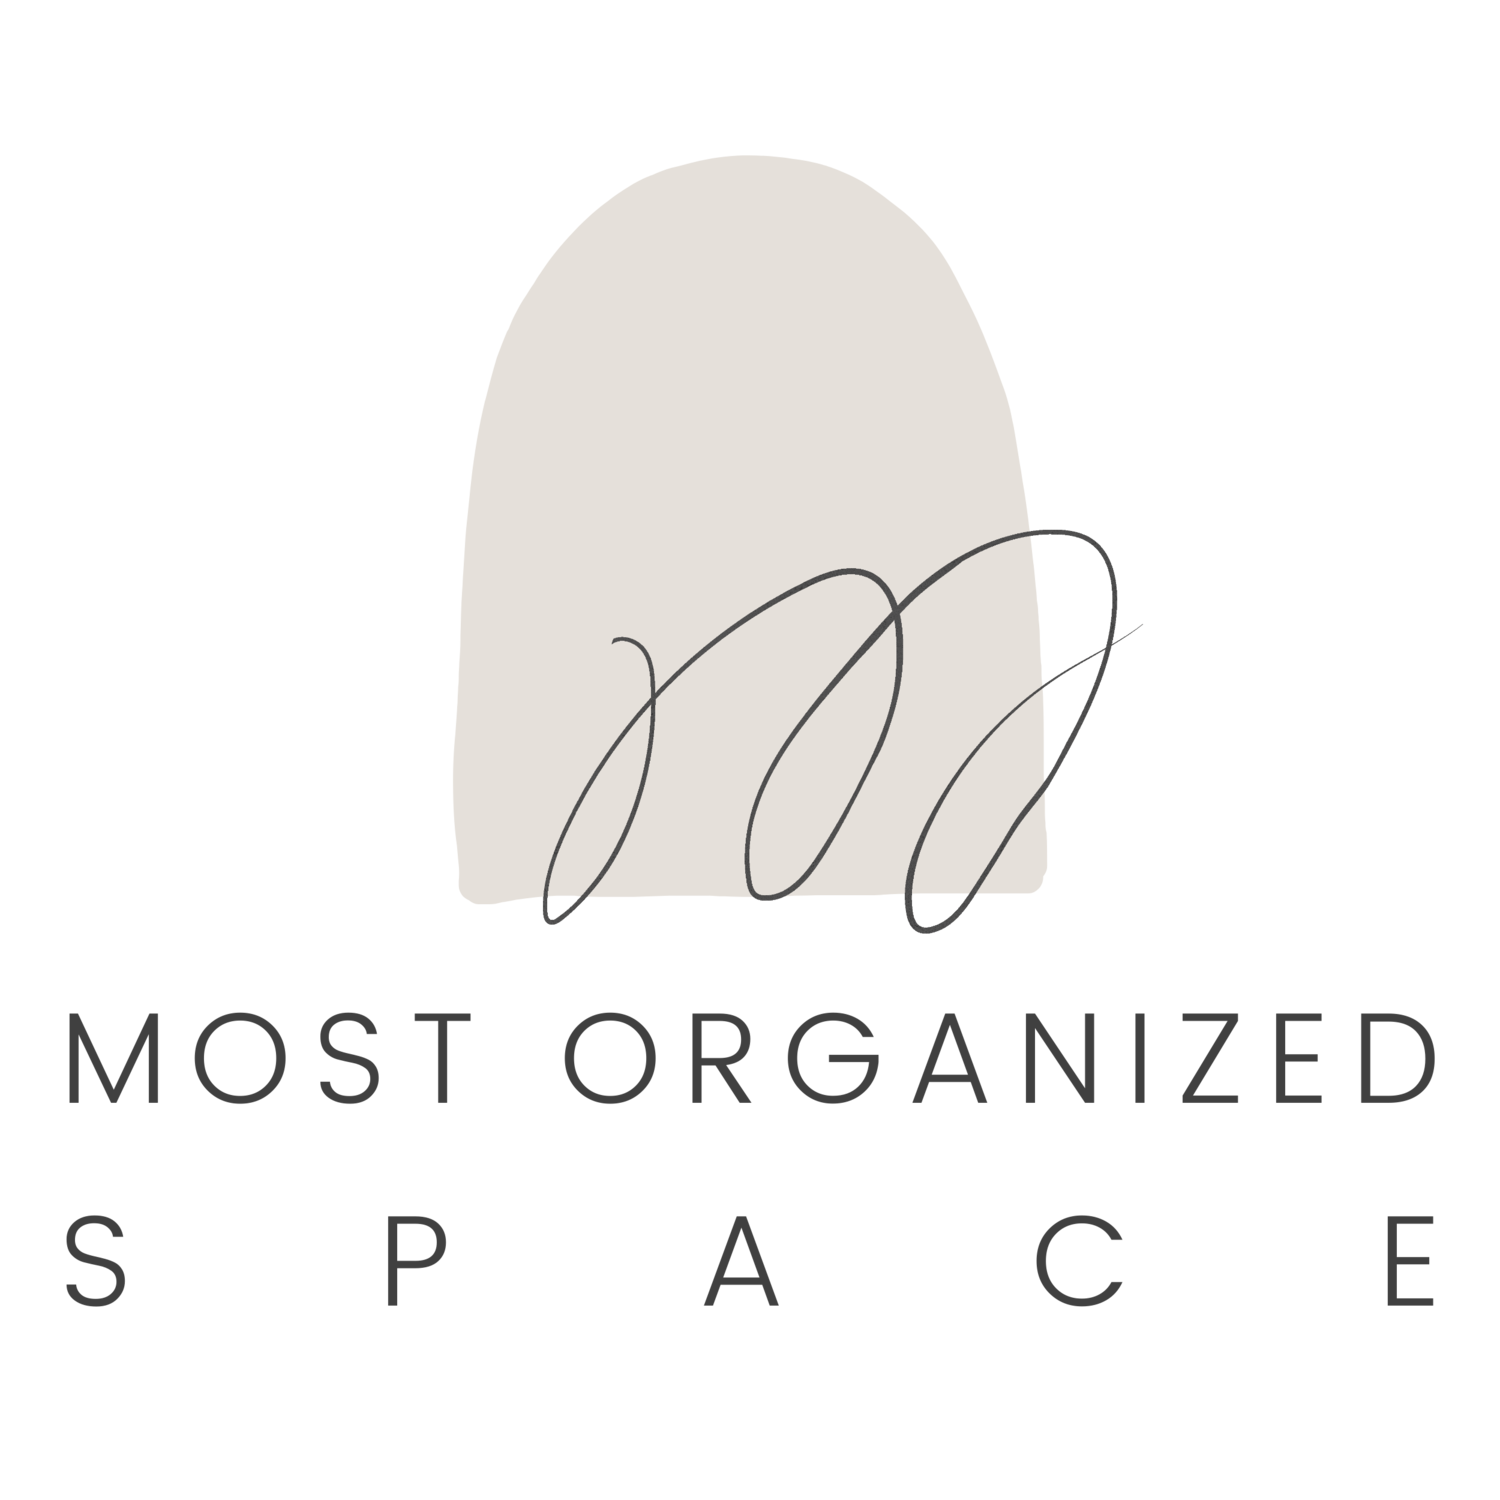 MOST ORGANIZED SPACE